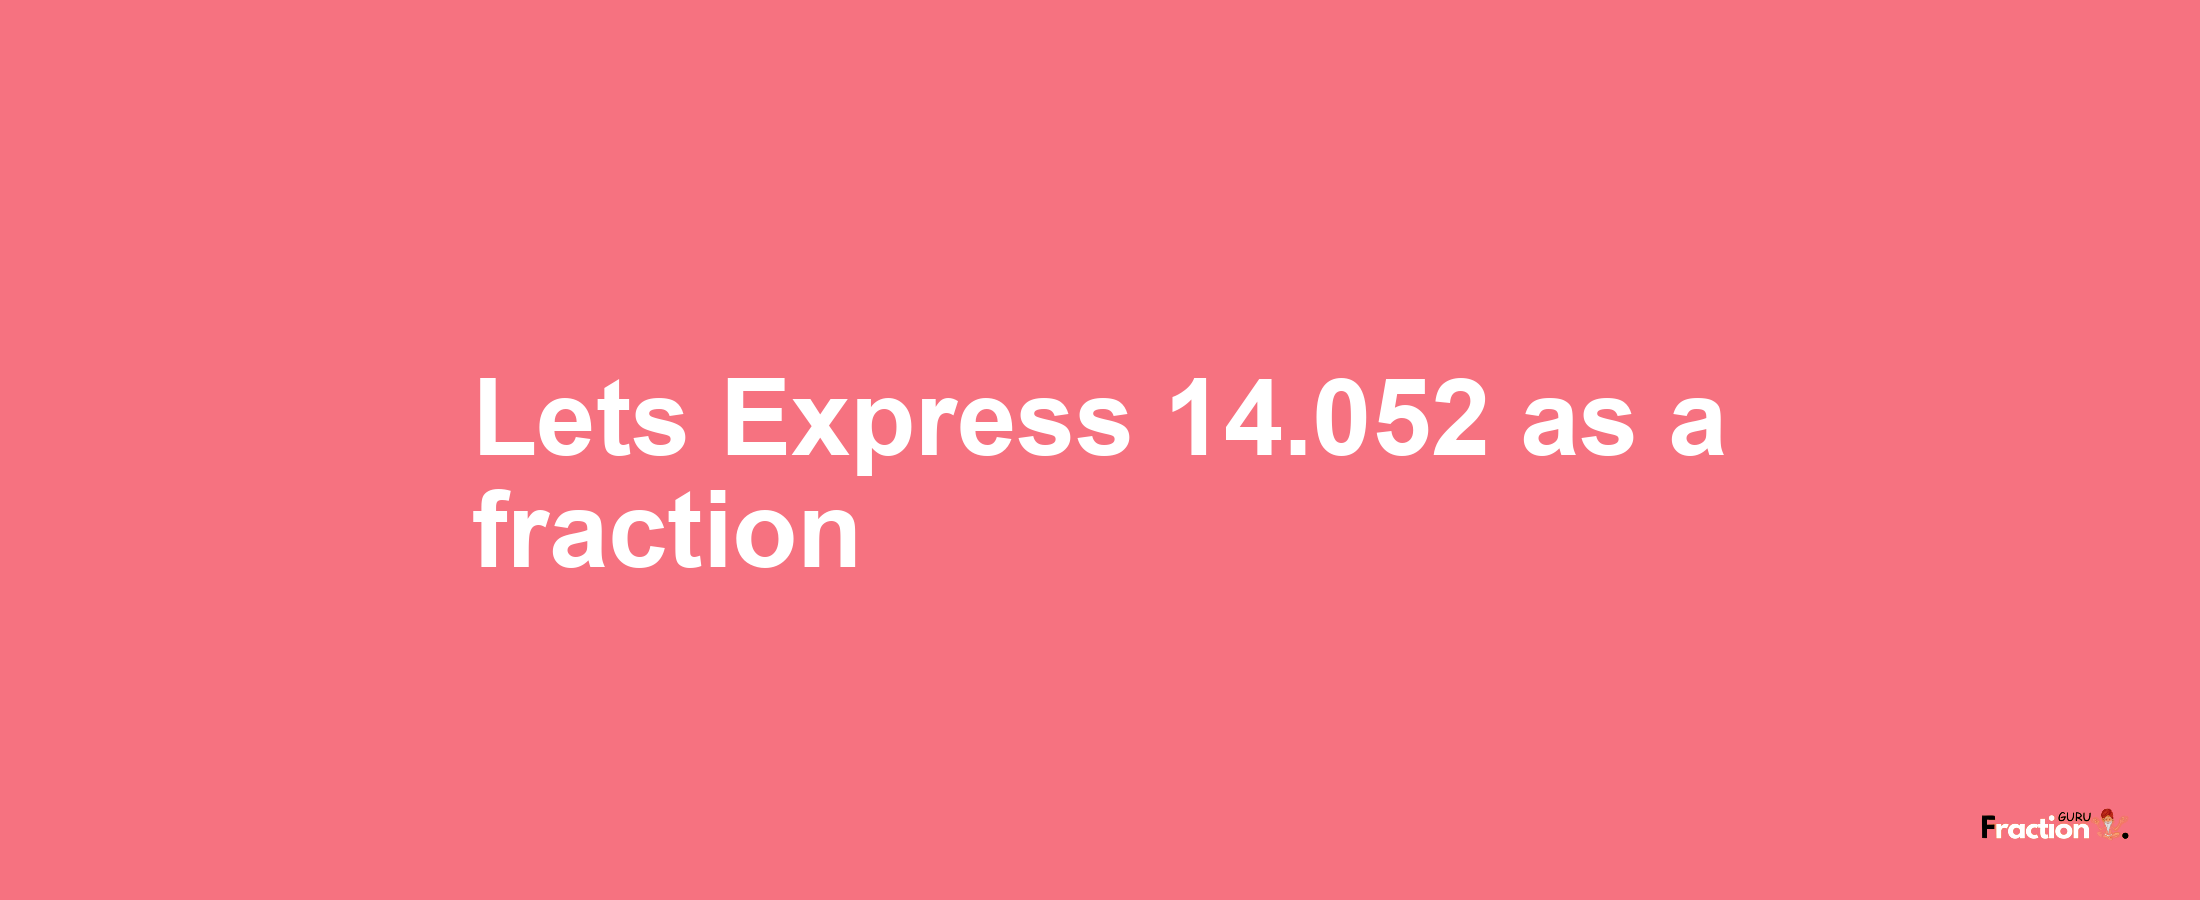 Lets Express 14.052 as afraction